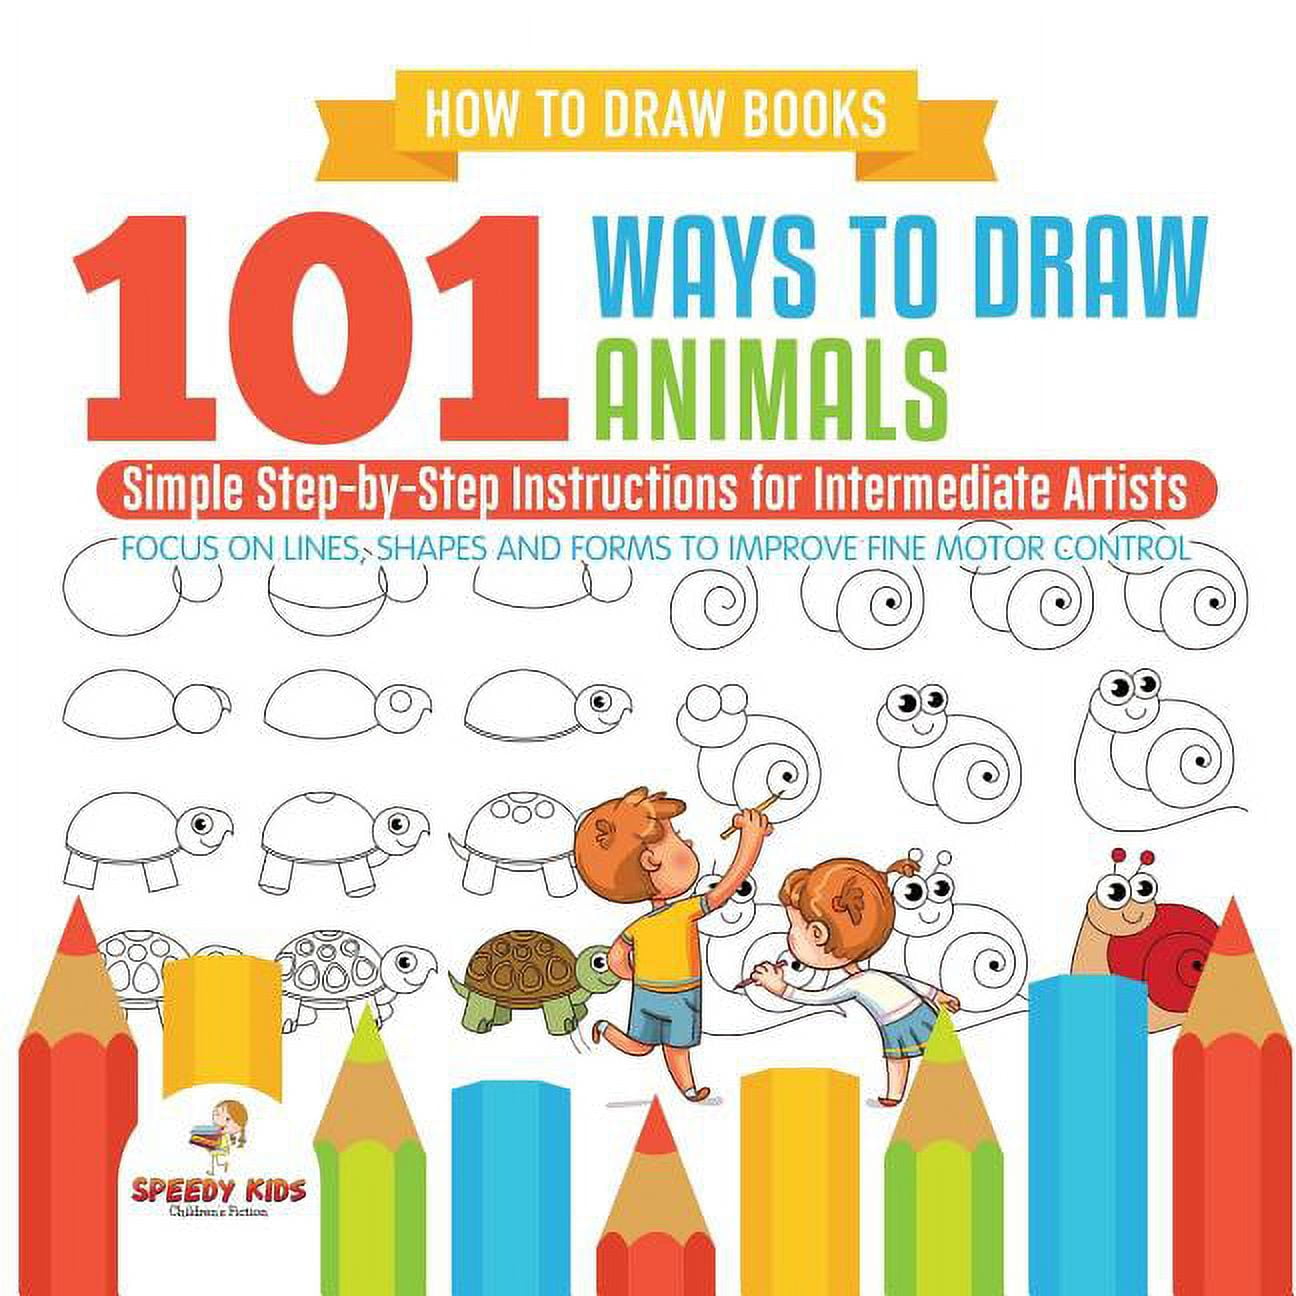 How to Draw Books. 101 Ways to Draw Animals. Simple Step-by-Step